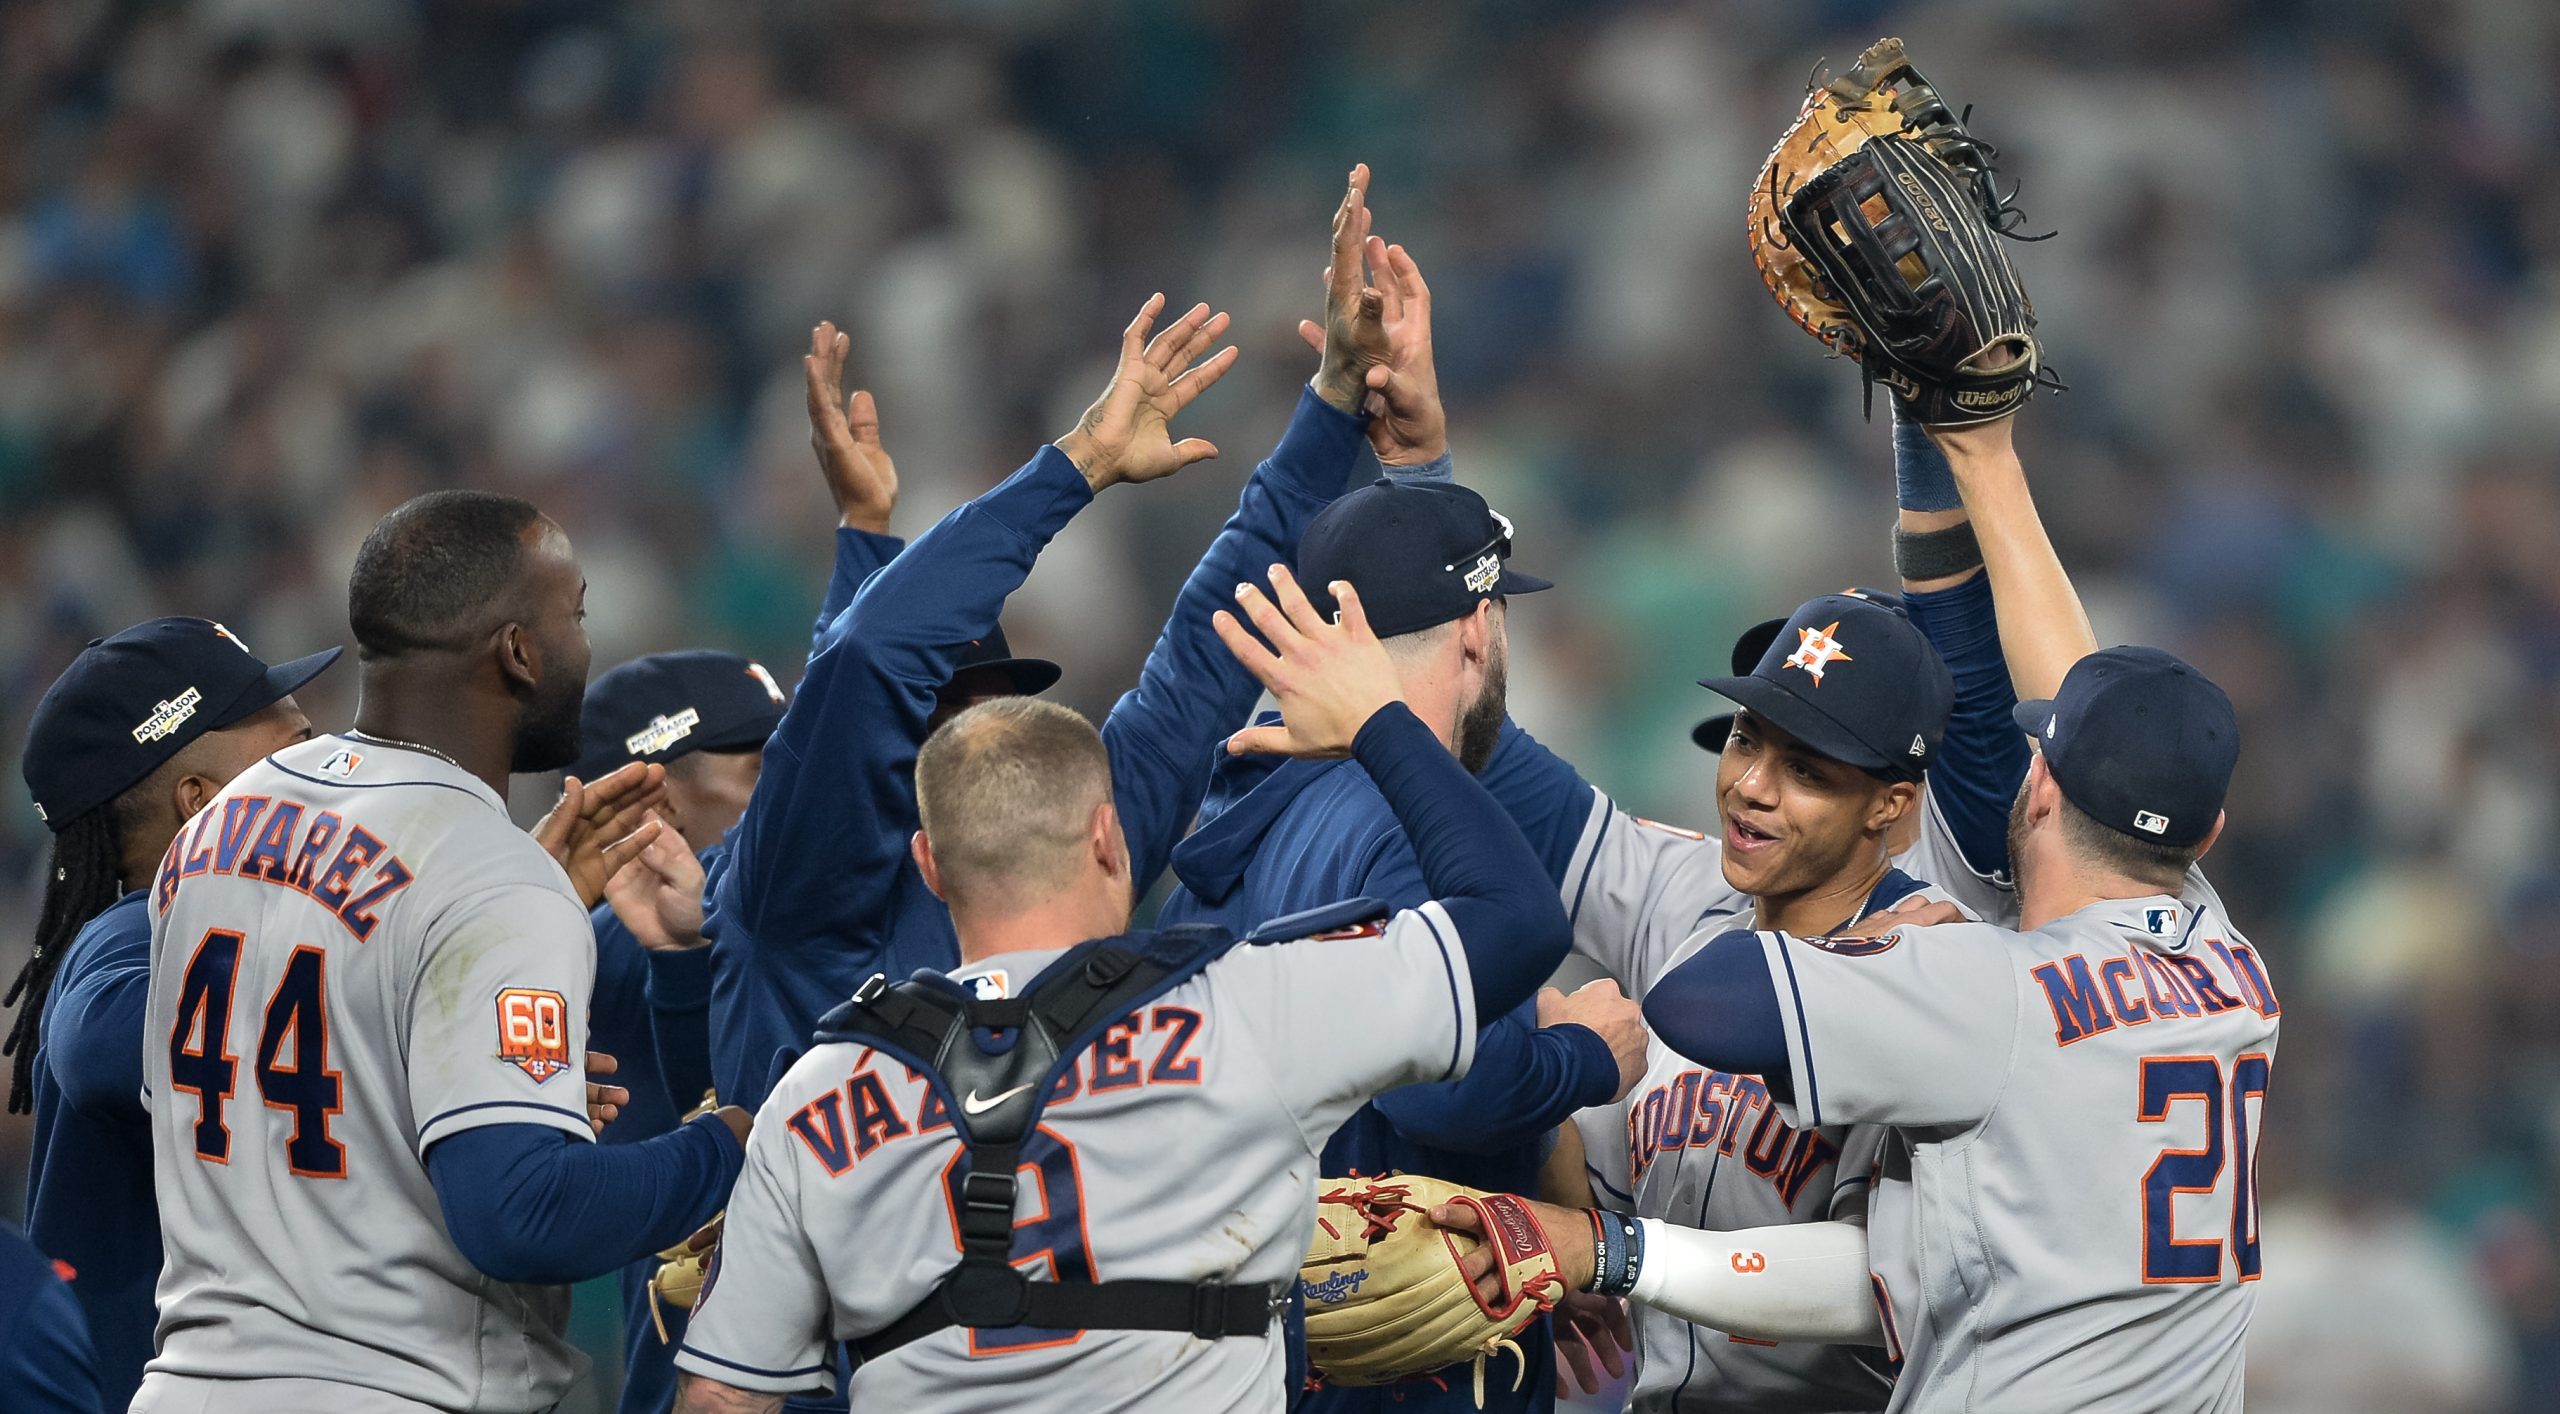 The Astros celebrate their win over the Mariners.